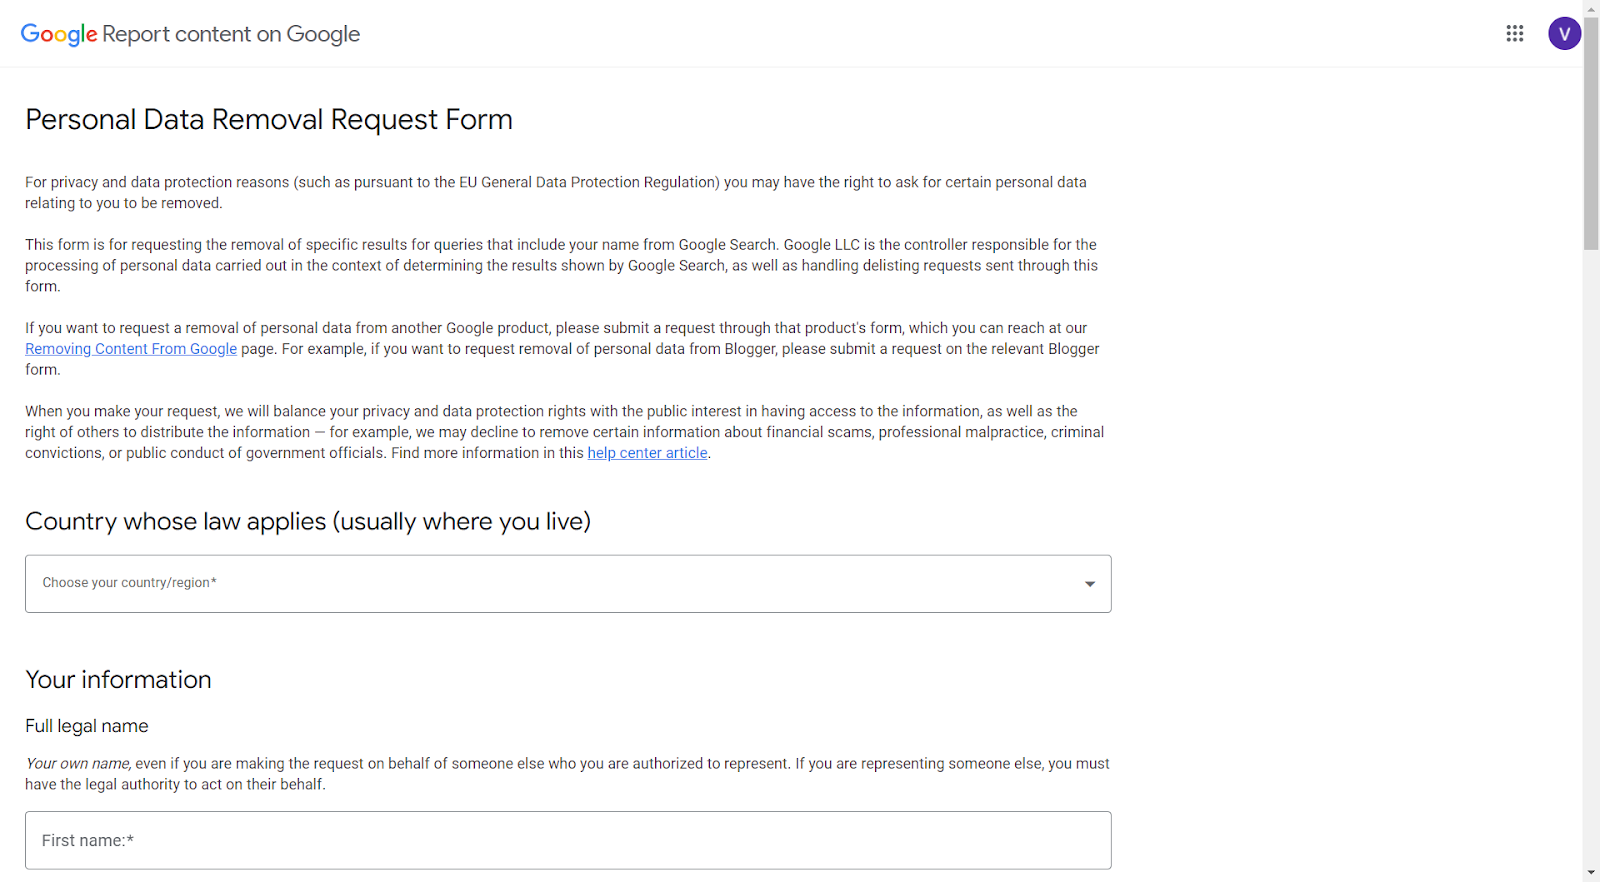 Google's personal data removal request form